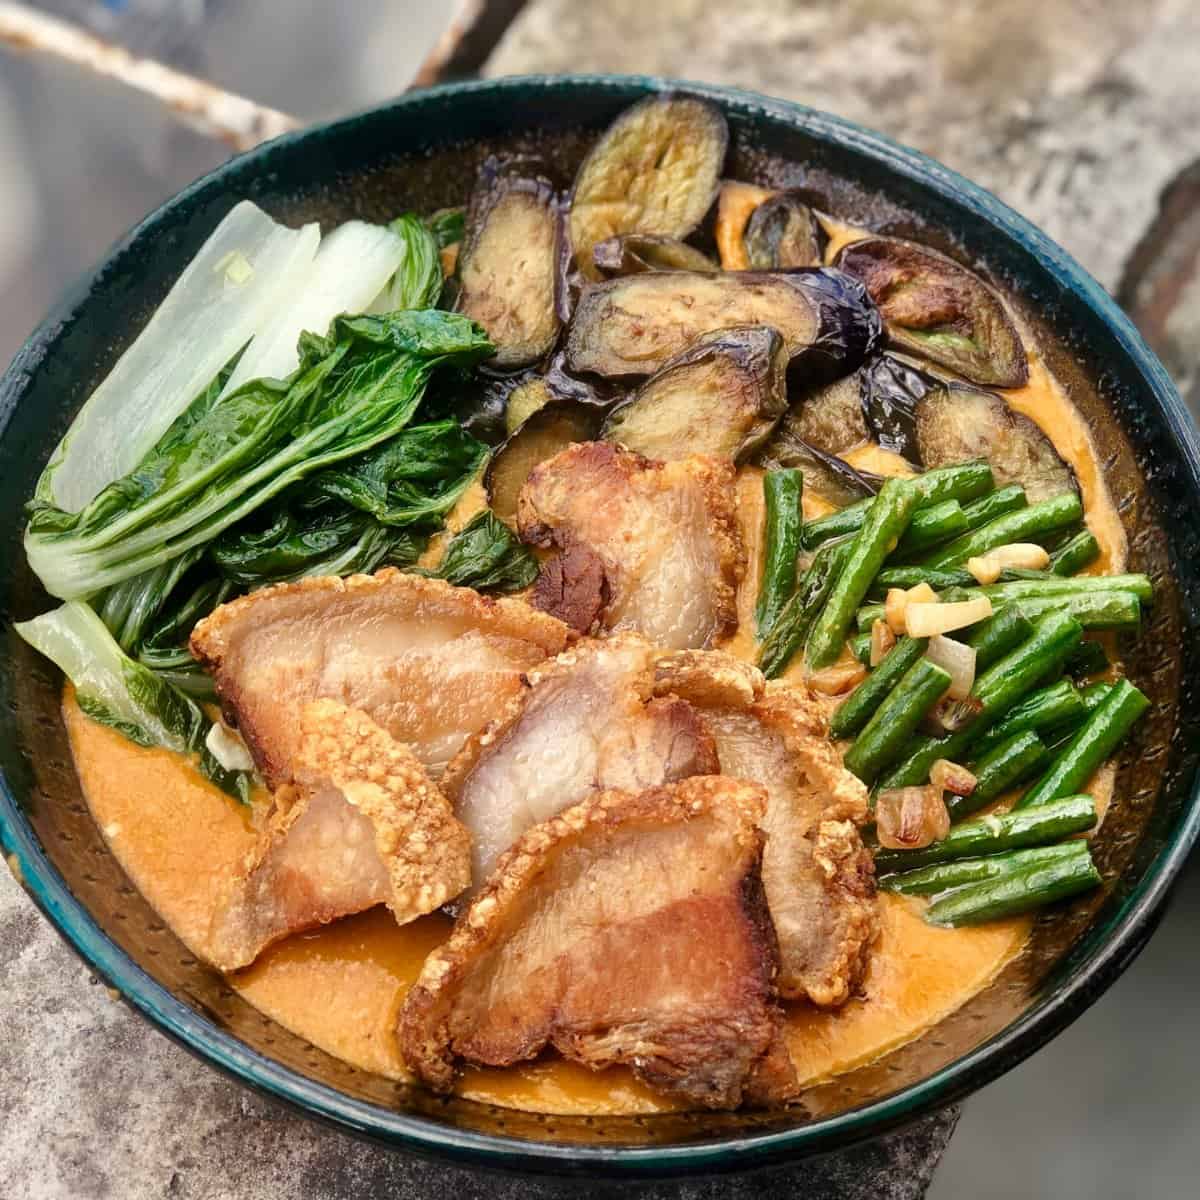 What is kare kare